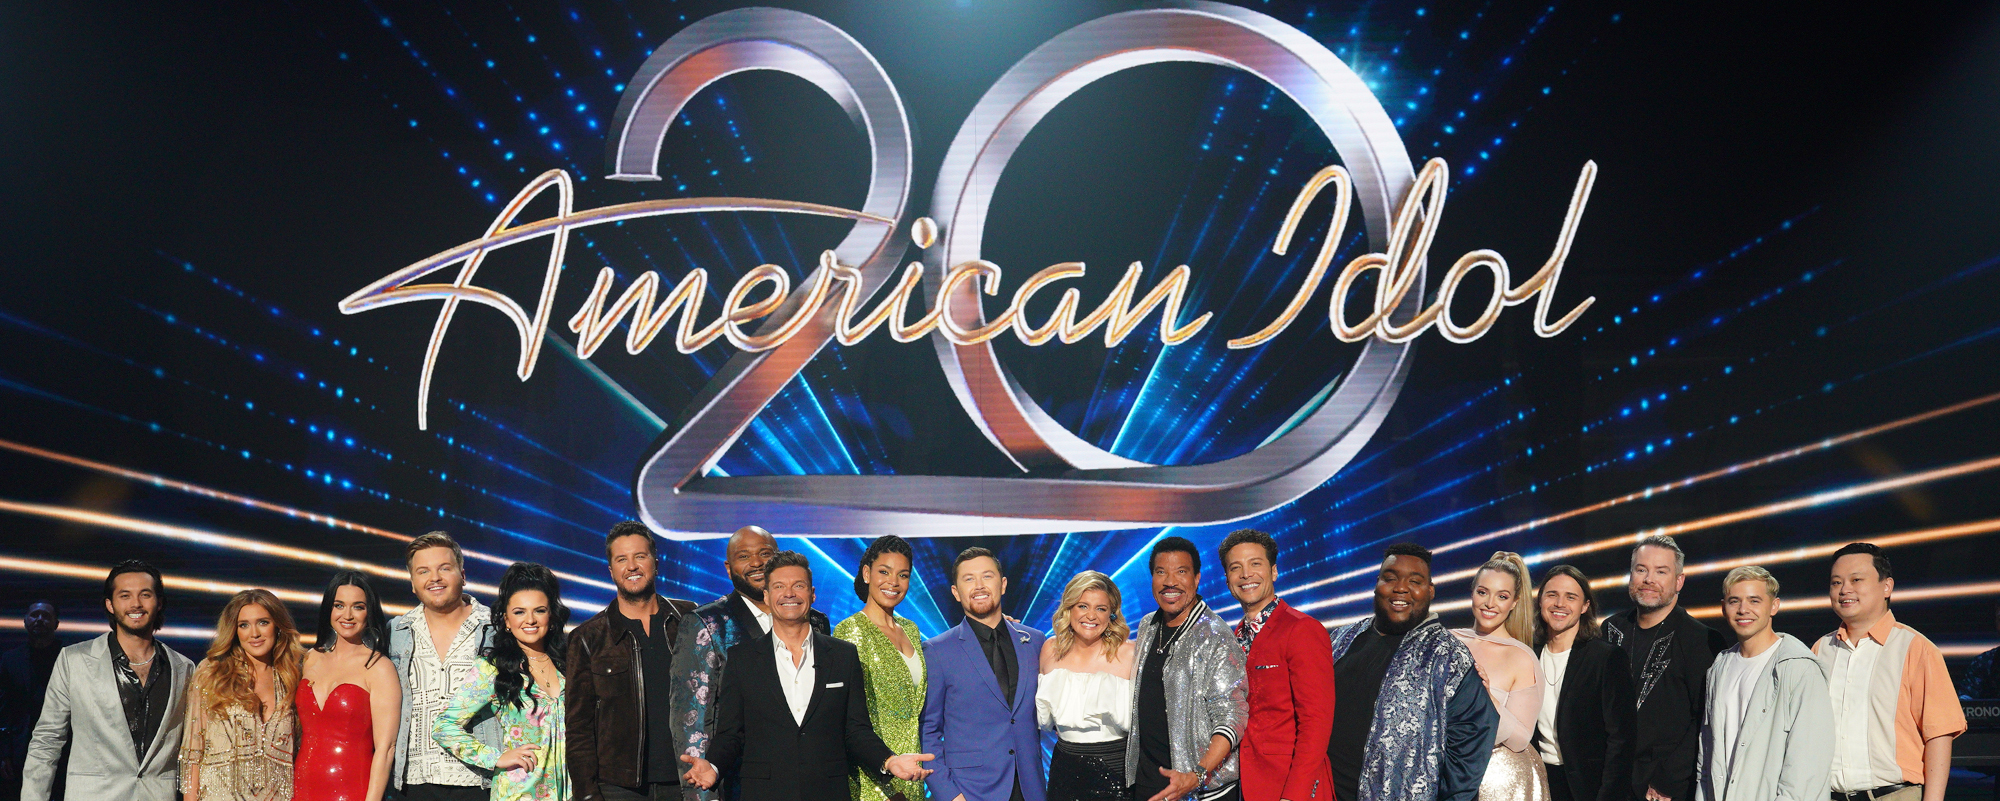 ‘American Idol’ Celebrates 20 Years with Reunion of Former Winners/Contestants